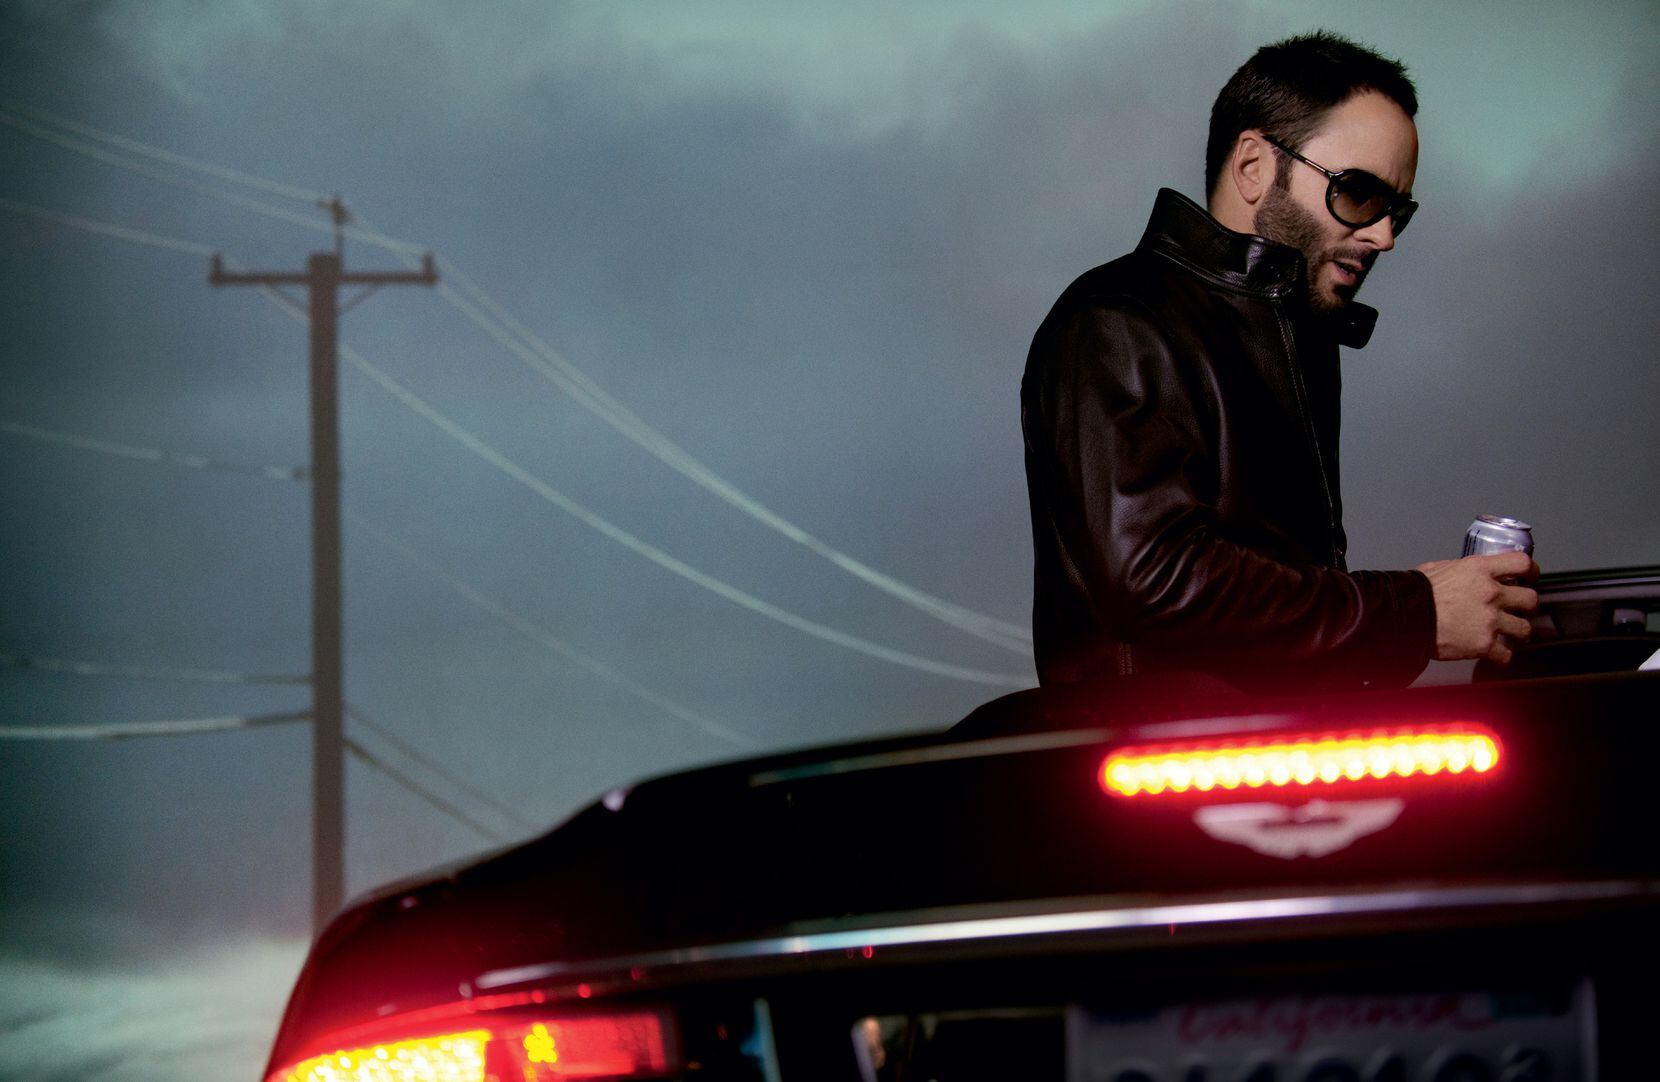 Sex, style, gloss. Tom Ford teases us again with his new book